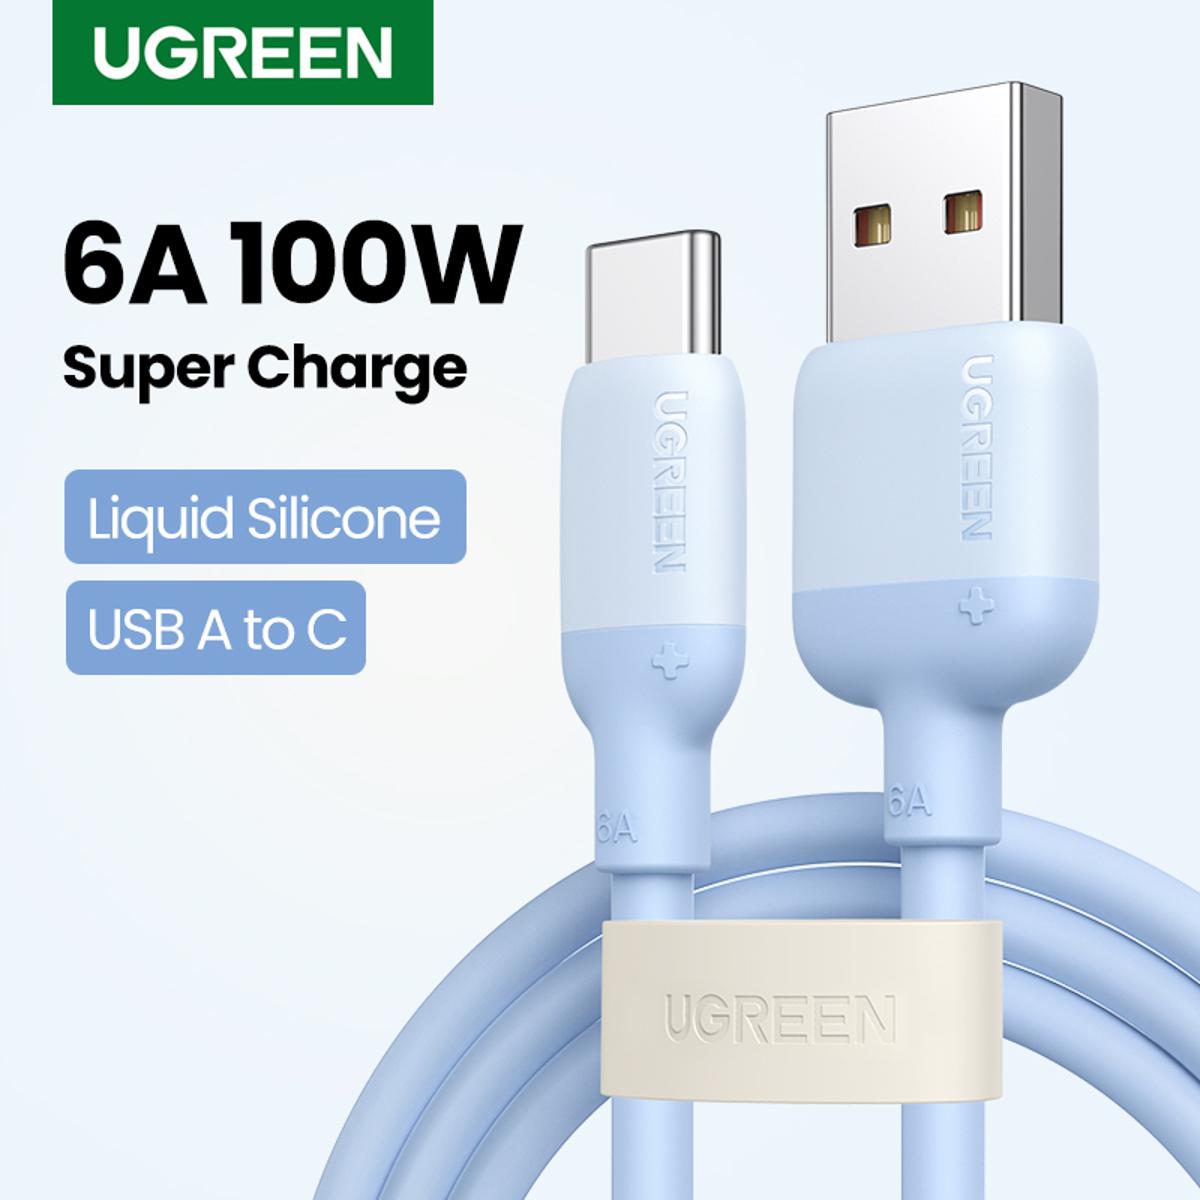 Ugreen cable usb type c Supercharge 40W - câble type c Supercharge